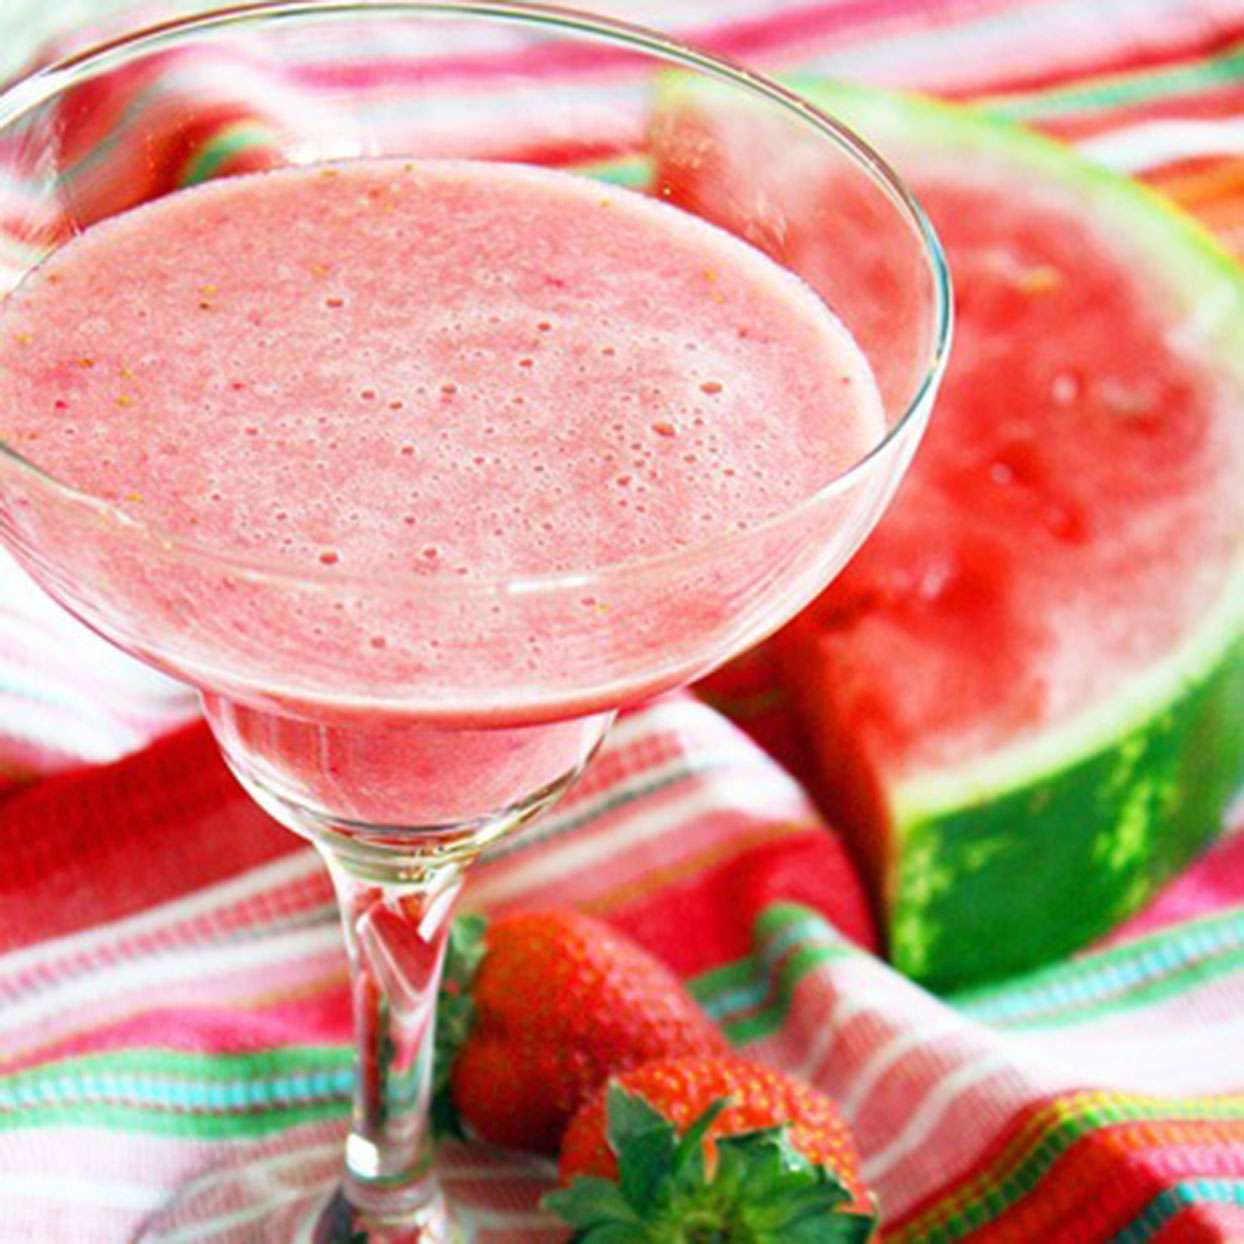 Watermelon, Strawberry, and Banana Smoothie